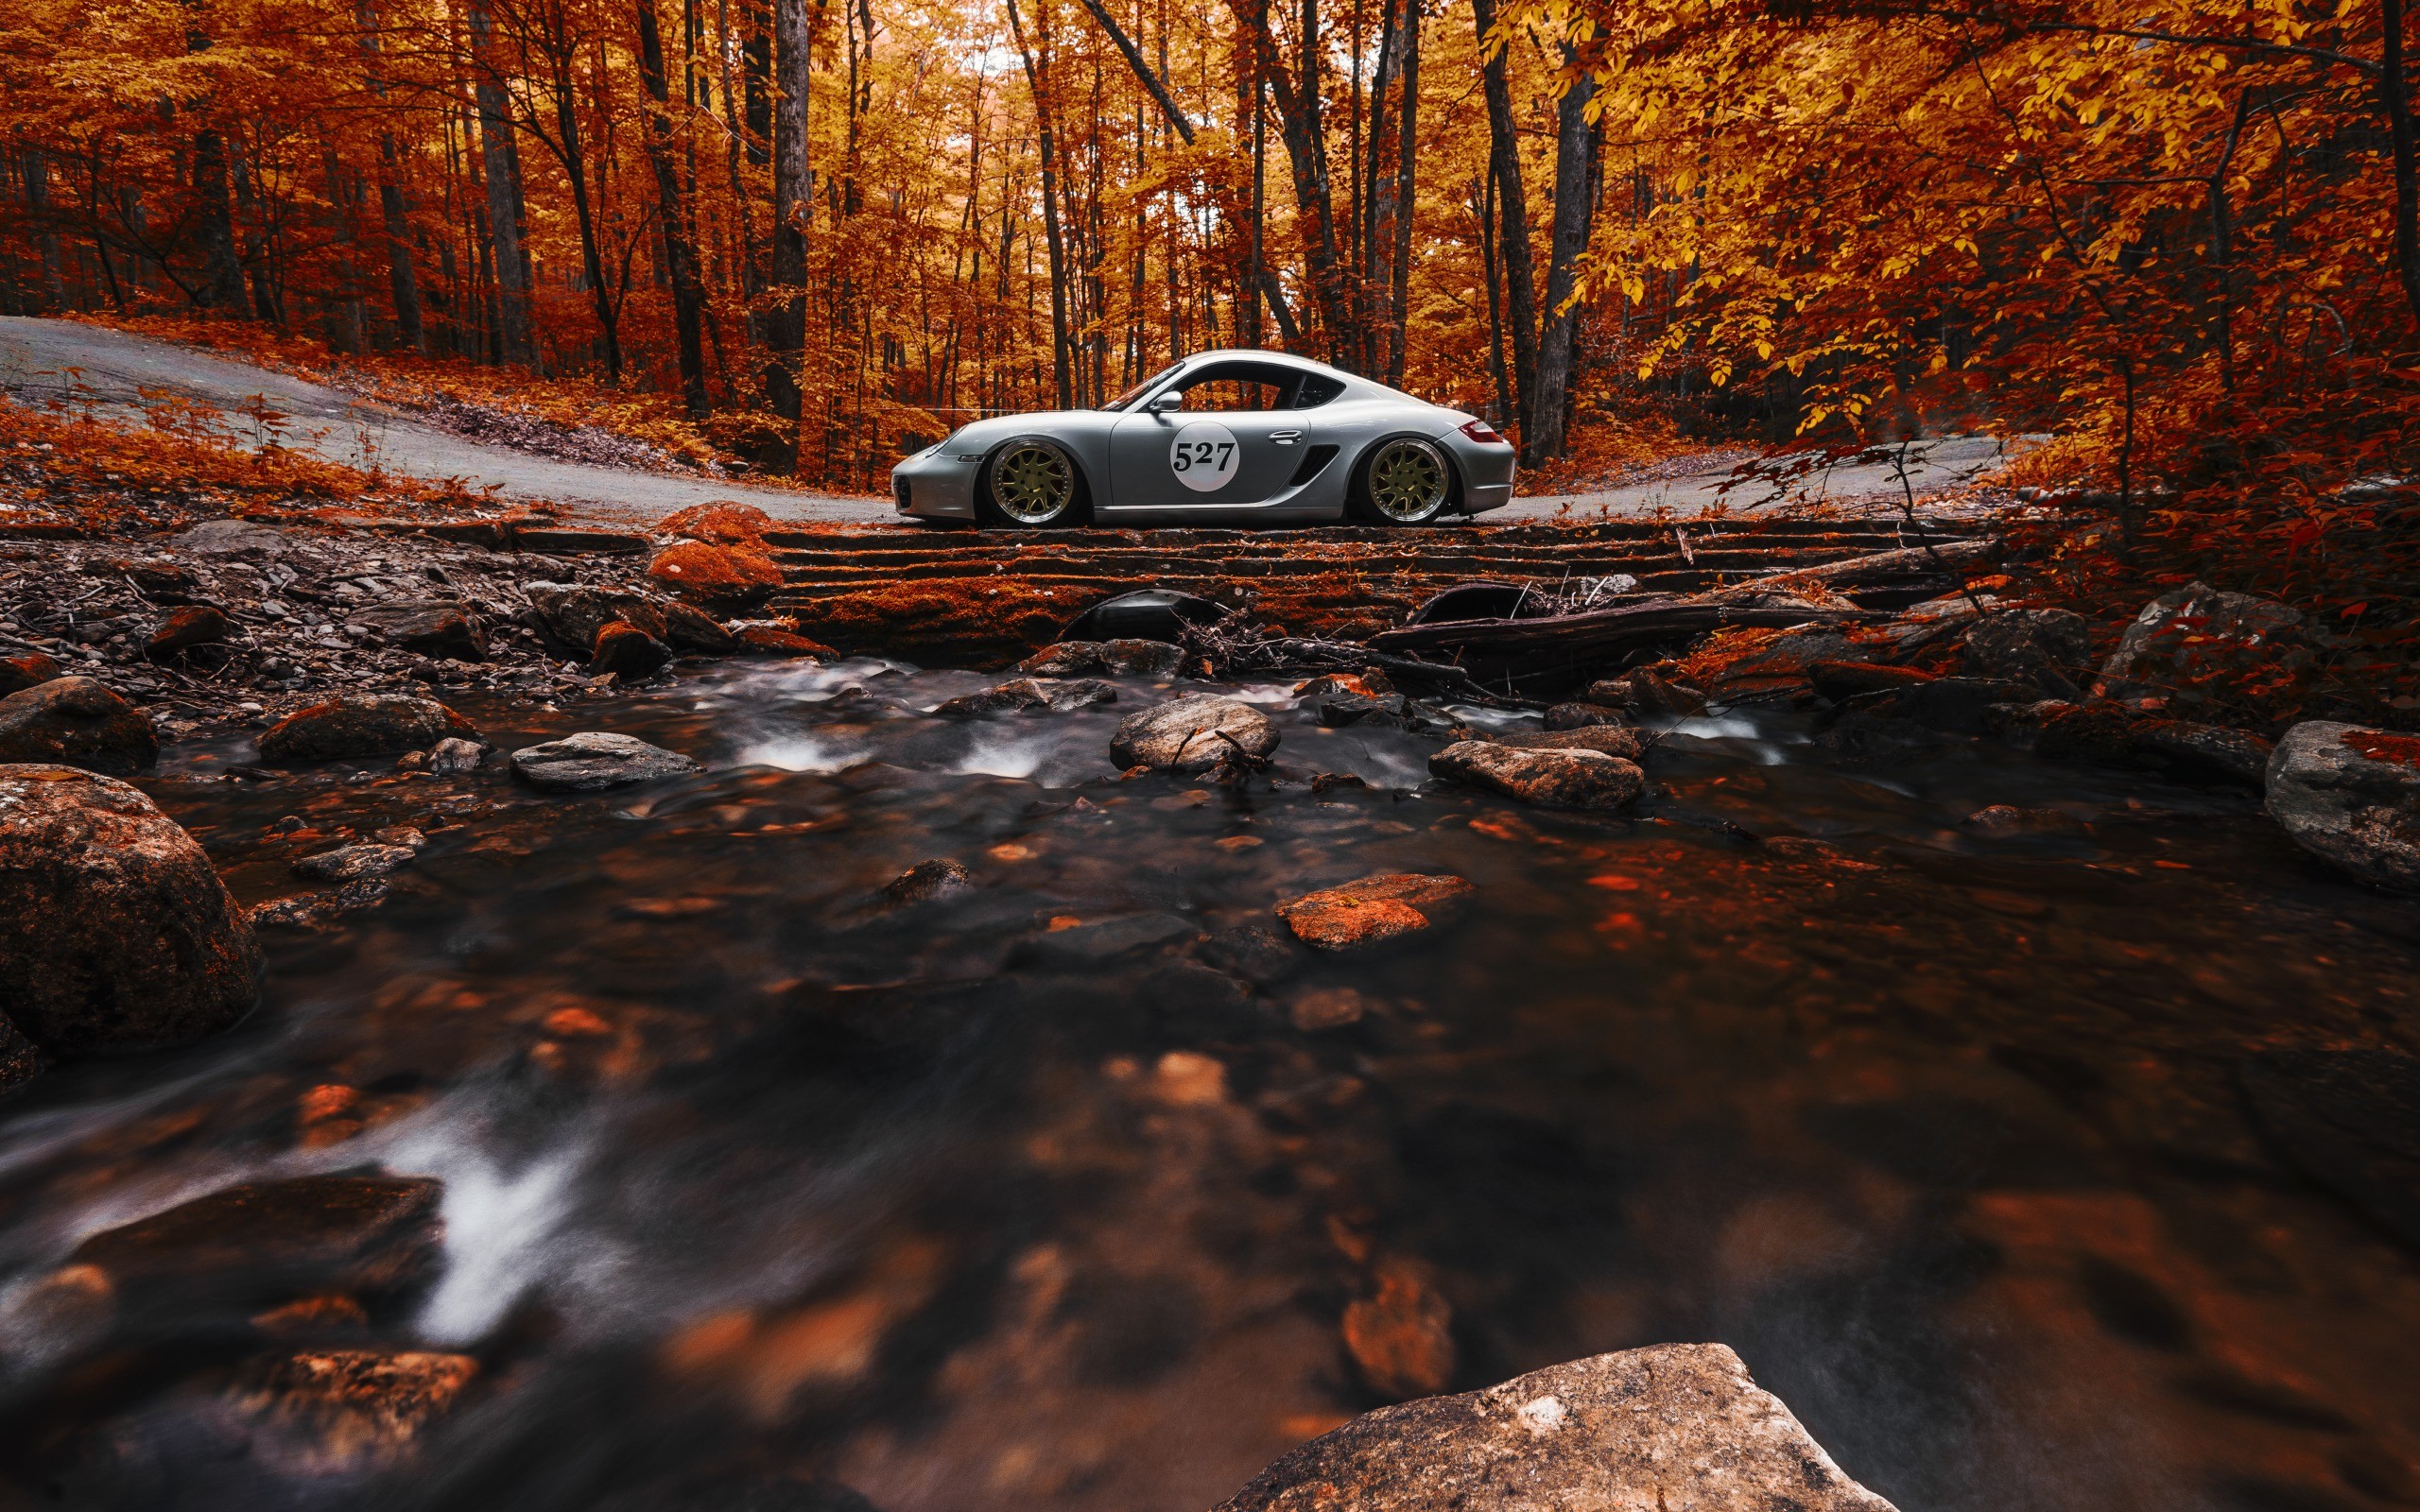 nature, Car, Trees, Forest, Fall, Vehicle, Leaves, Long